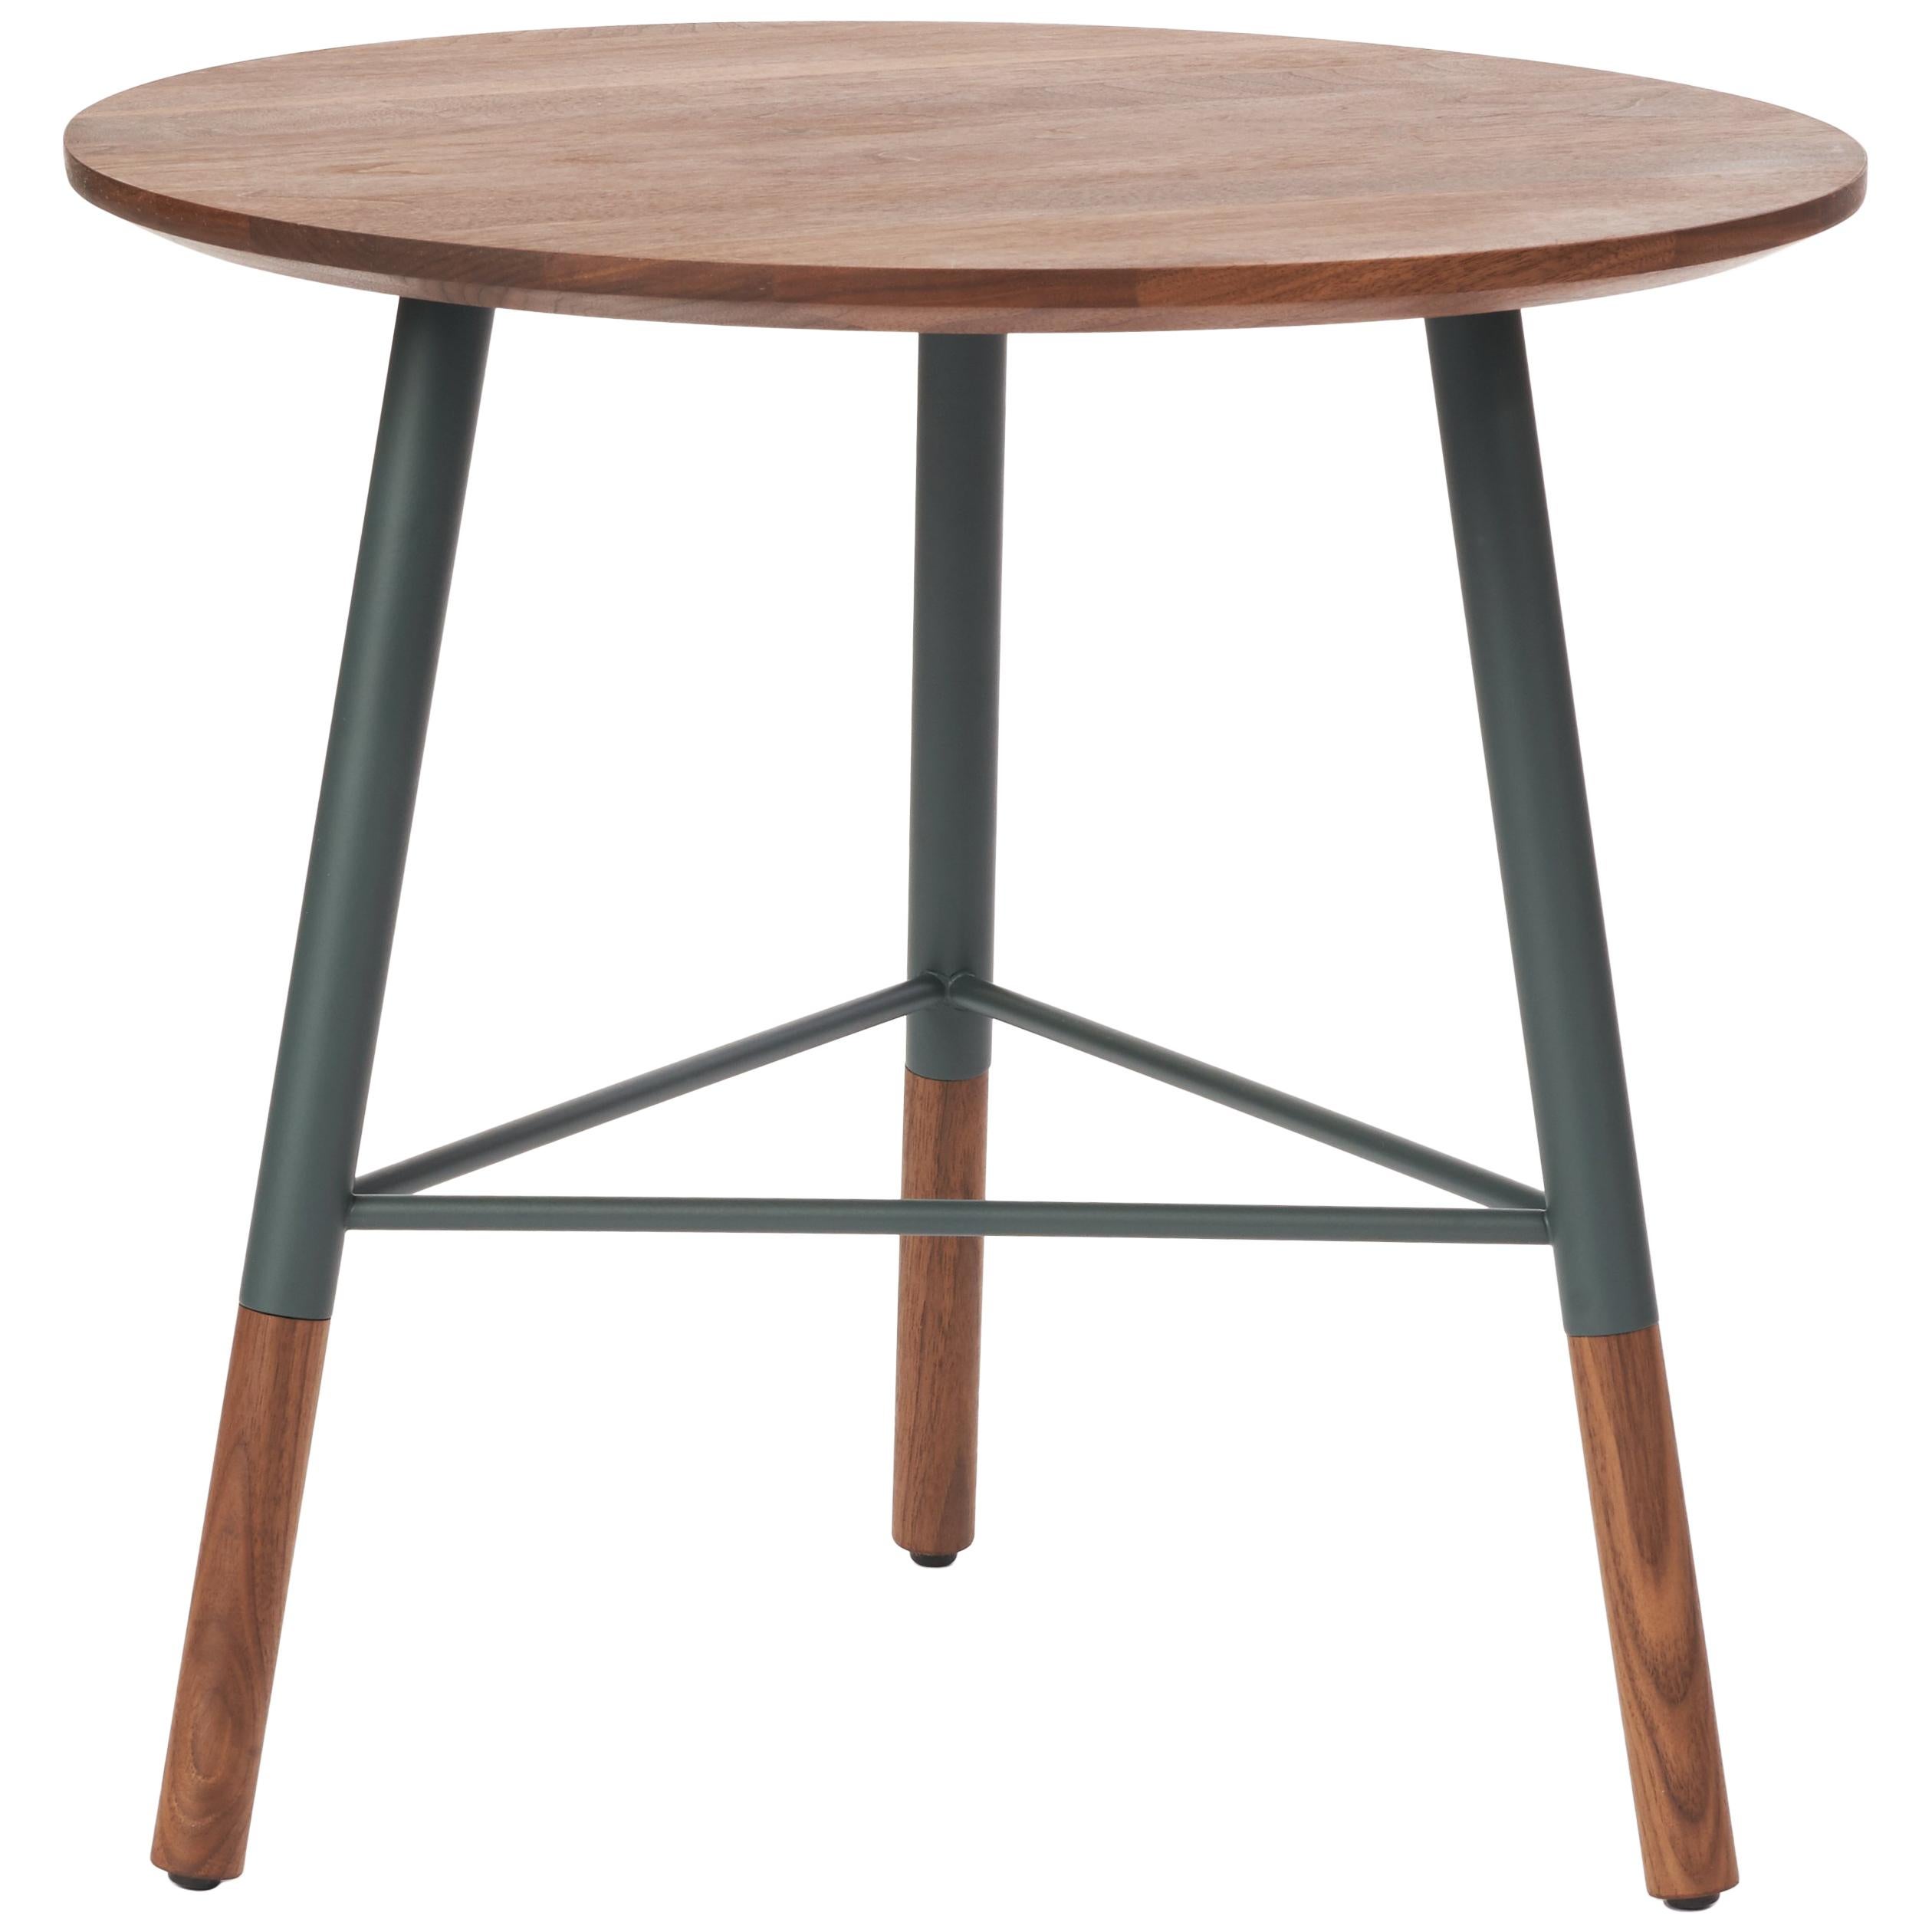 49N Coffee Table, Melton Wool and Eco-Friendly Powder Coated Steel Frame For Sale